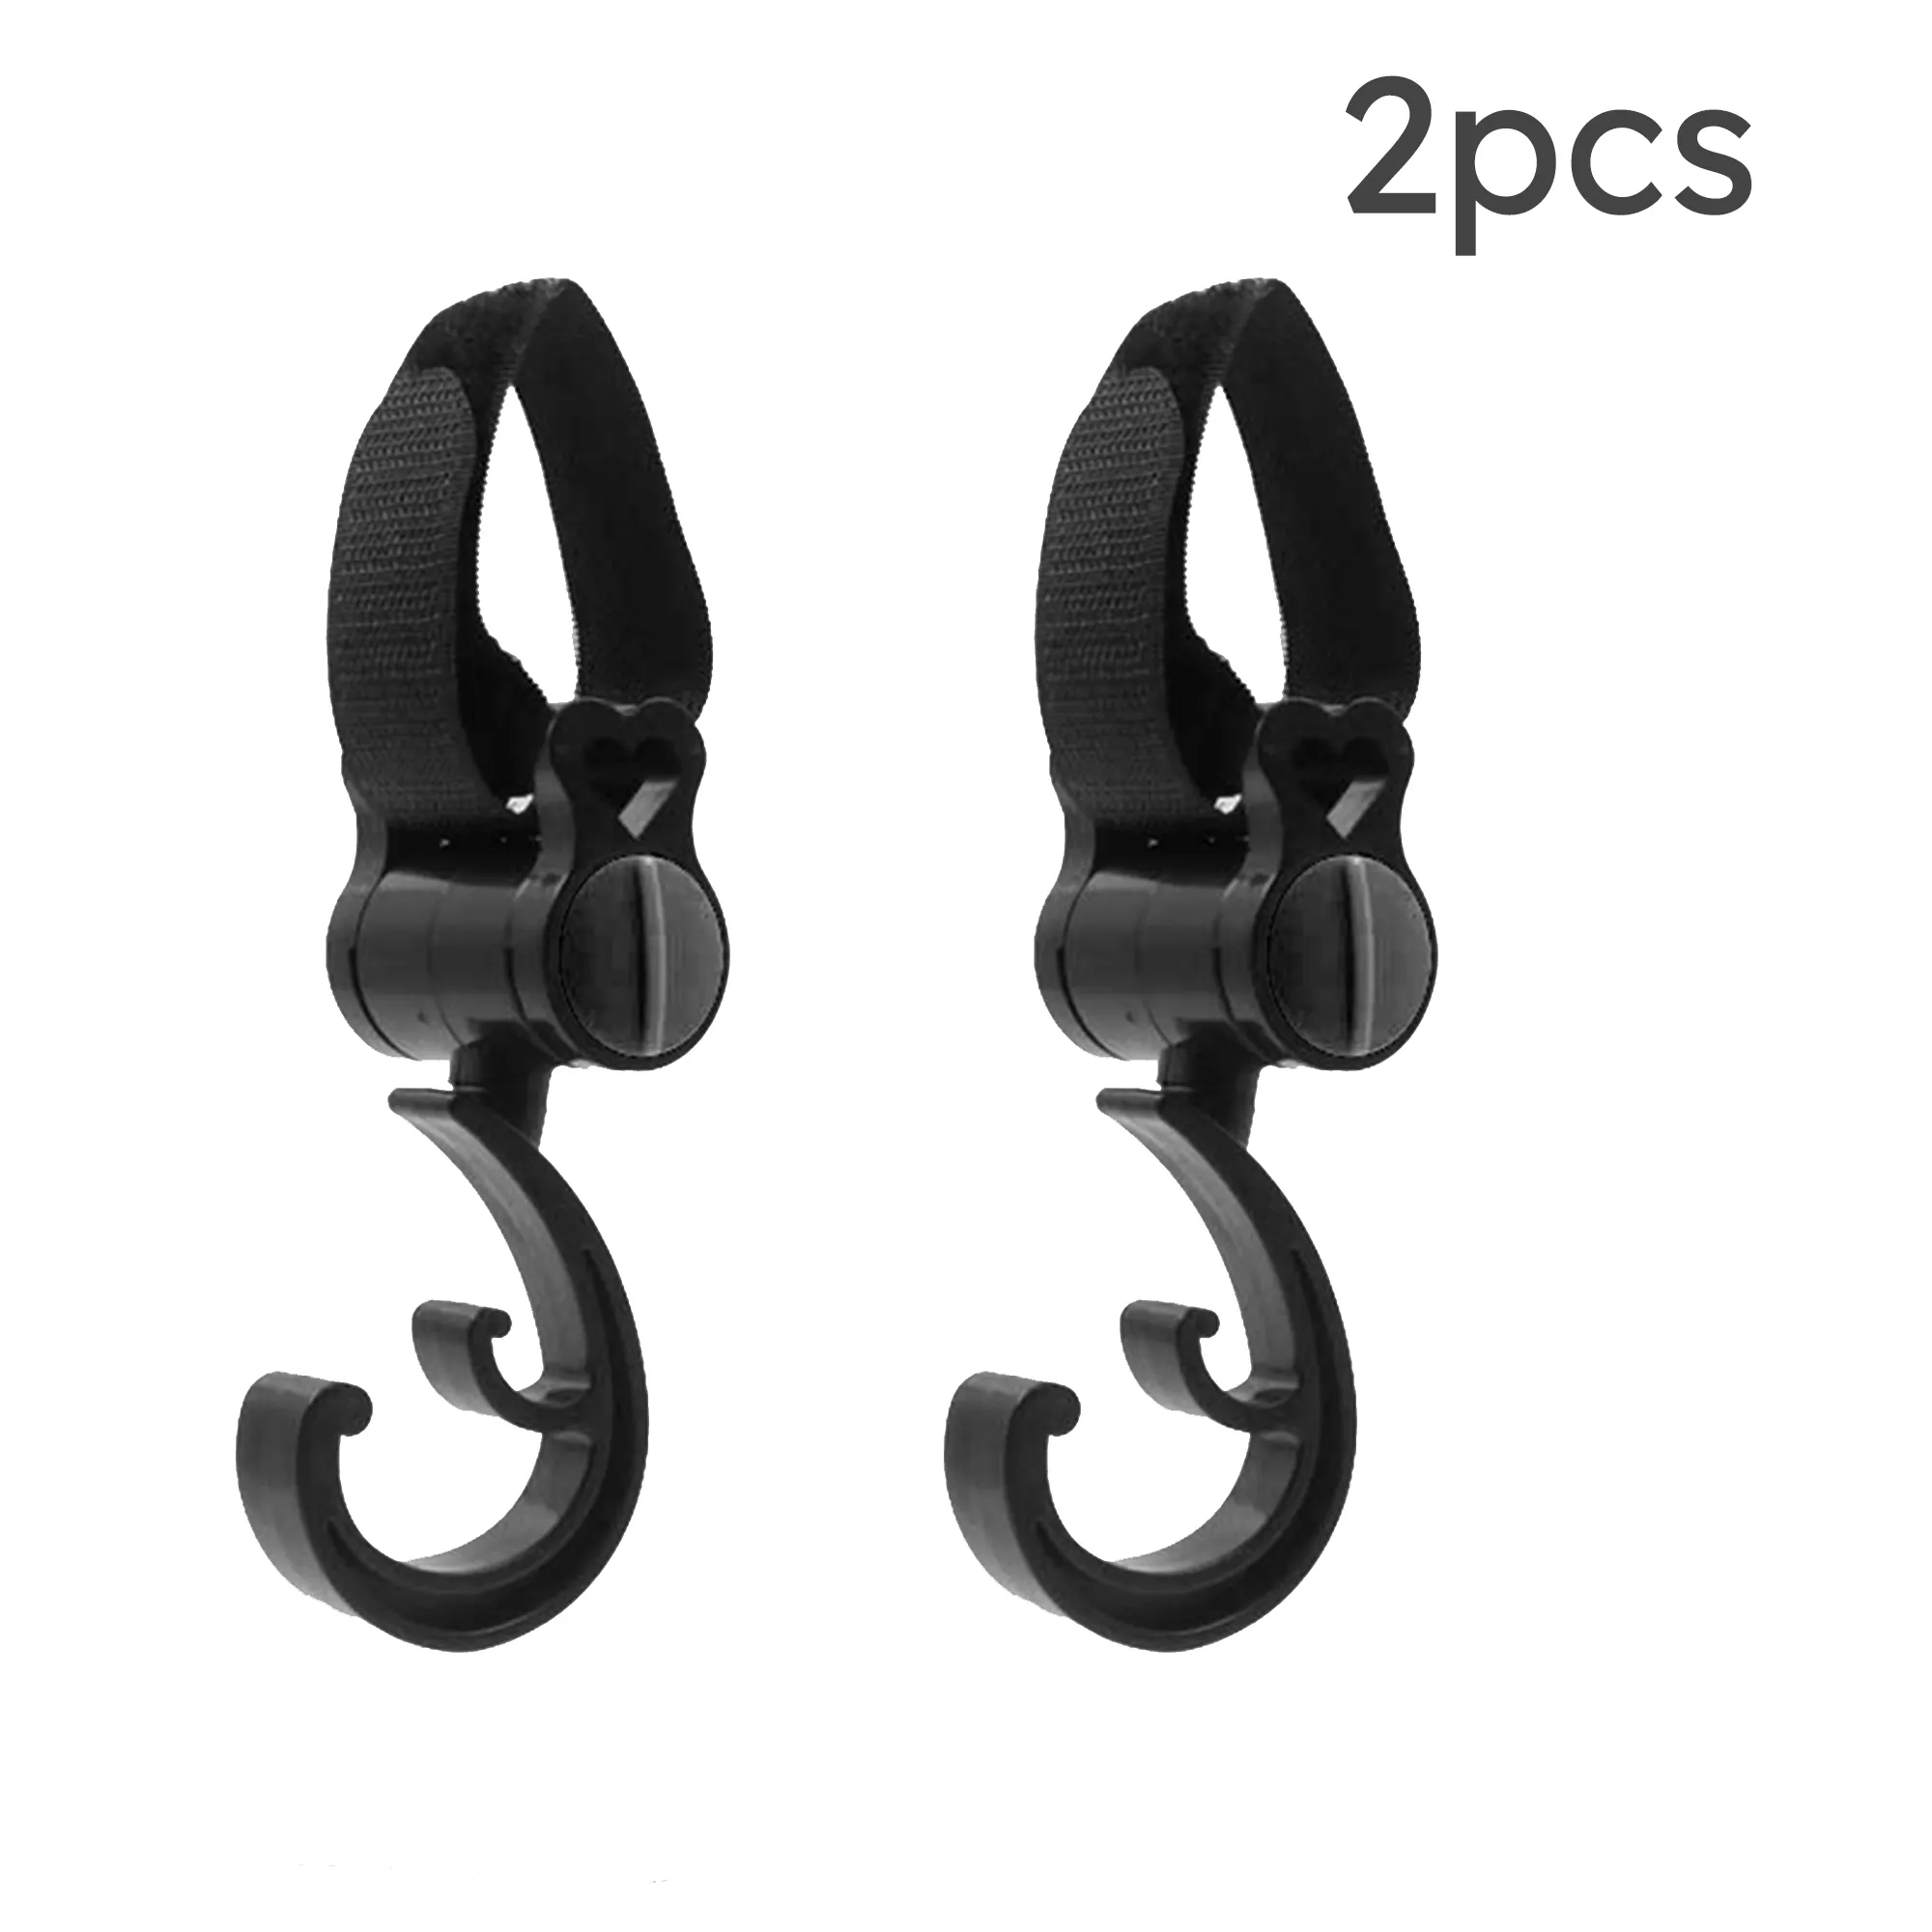 

360° Rotating Hook for Baby Strollers and Cribs - Multifunctional Hanger for Diaper Bags and Shopping Bags